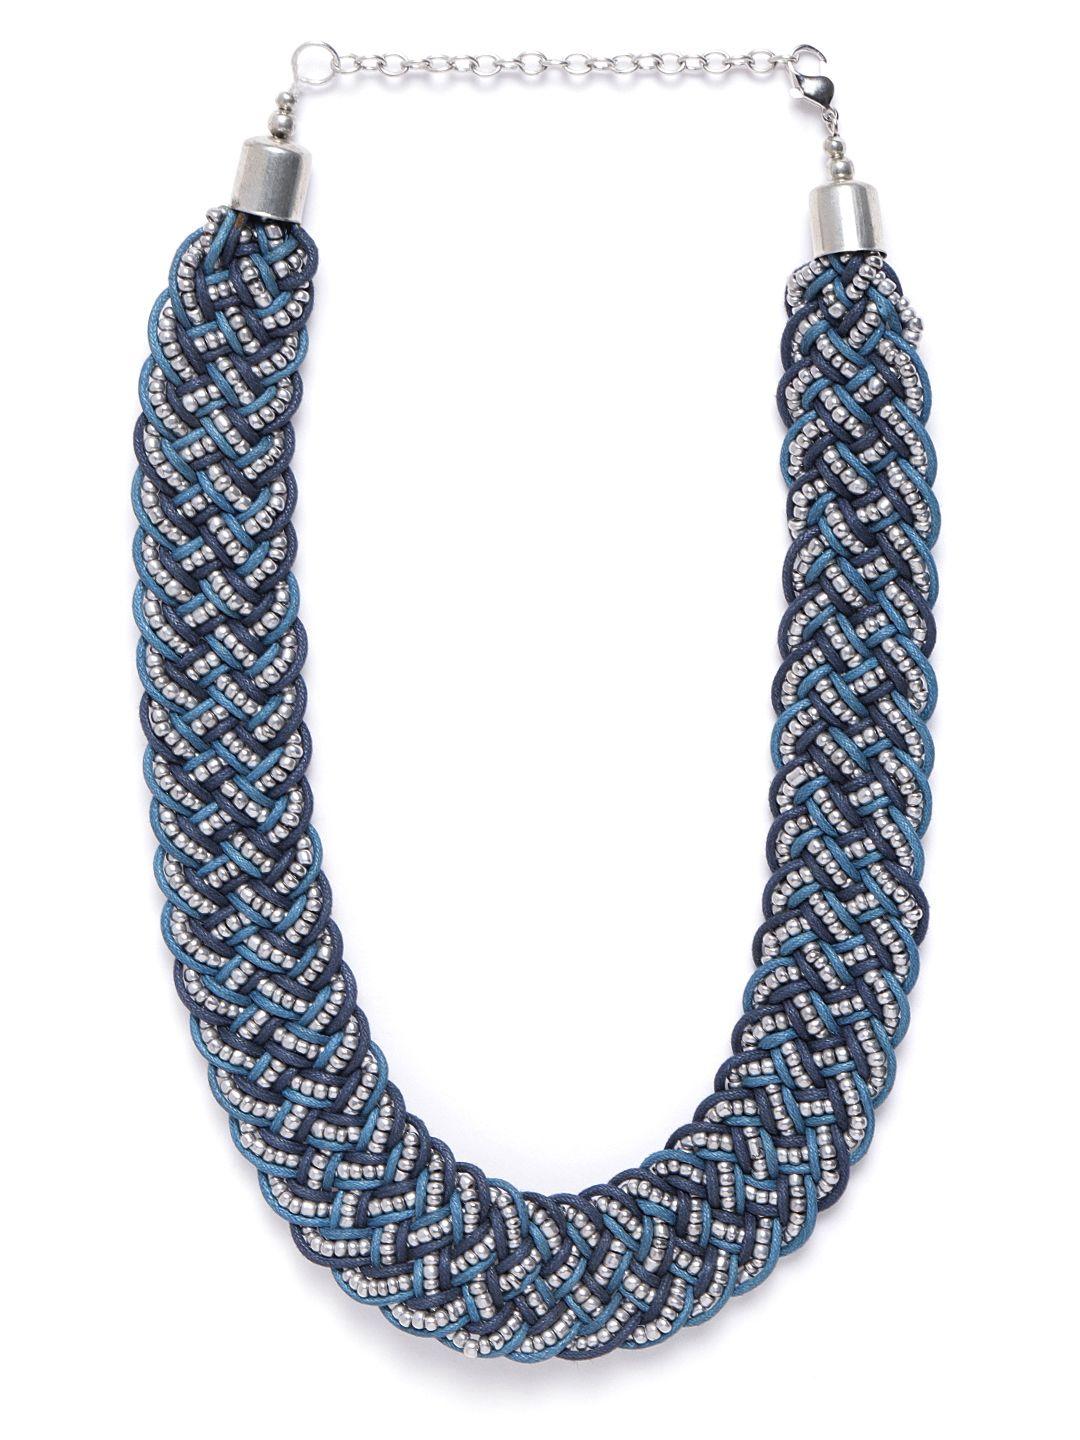 richeera blue & silver-toned beaded statement bohemian braided necklace